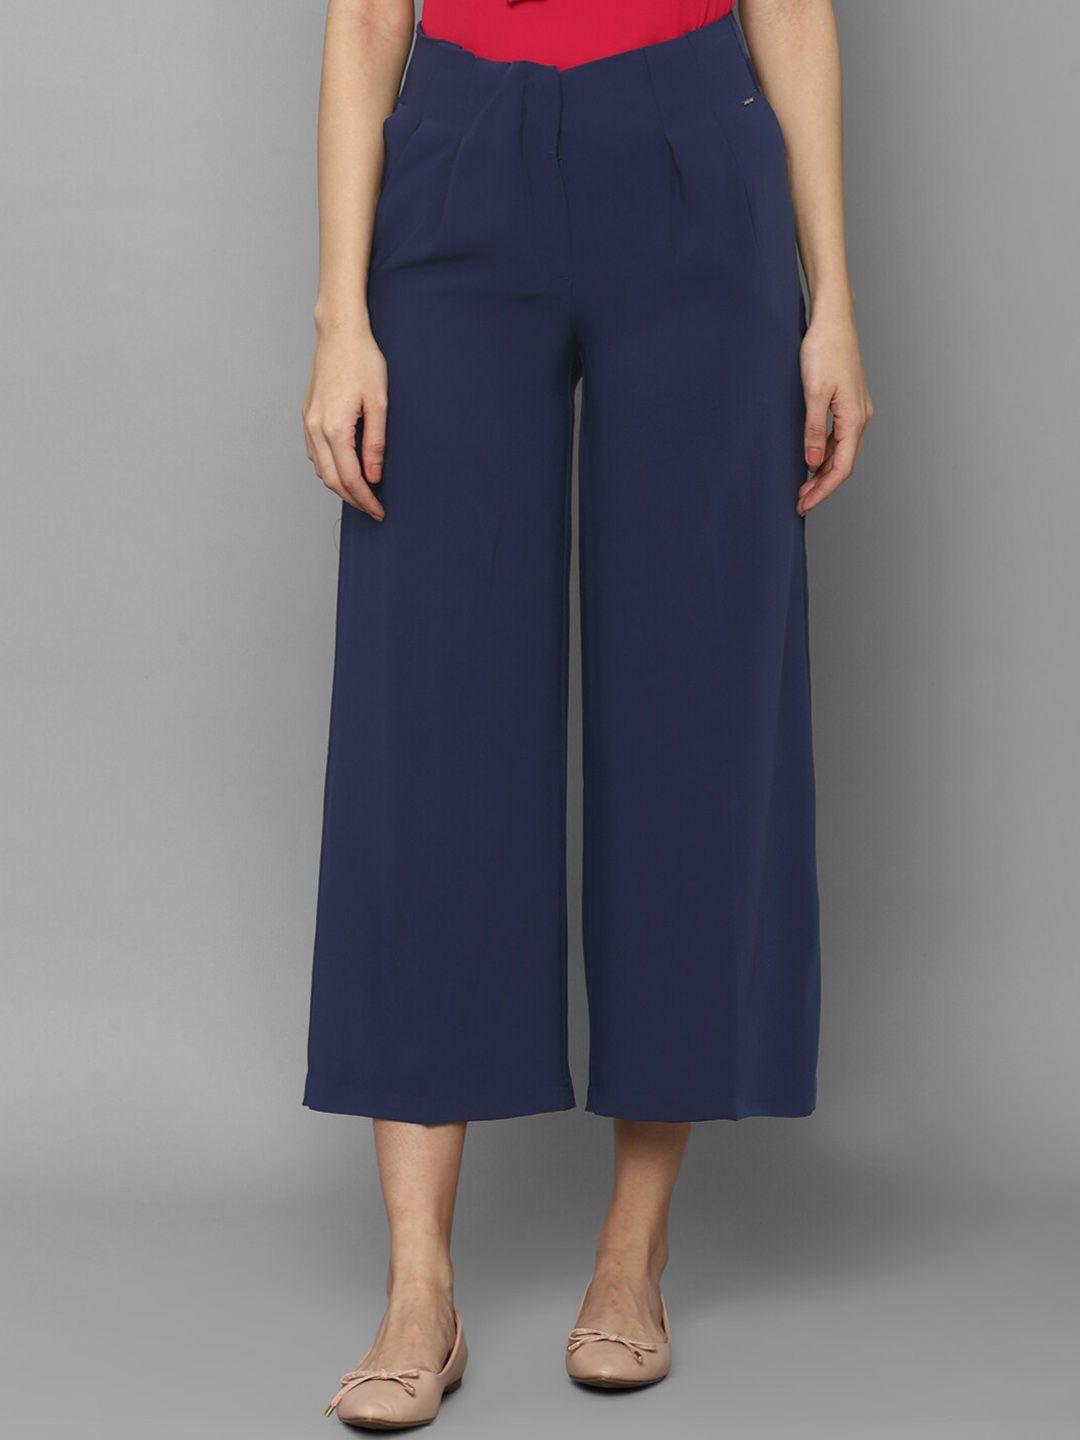 allen solly woman women navy blue pleated culottes trousers